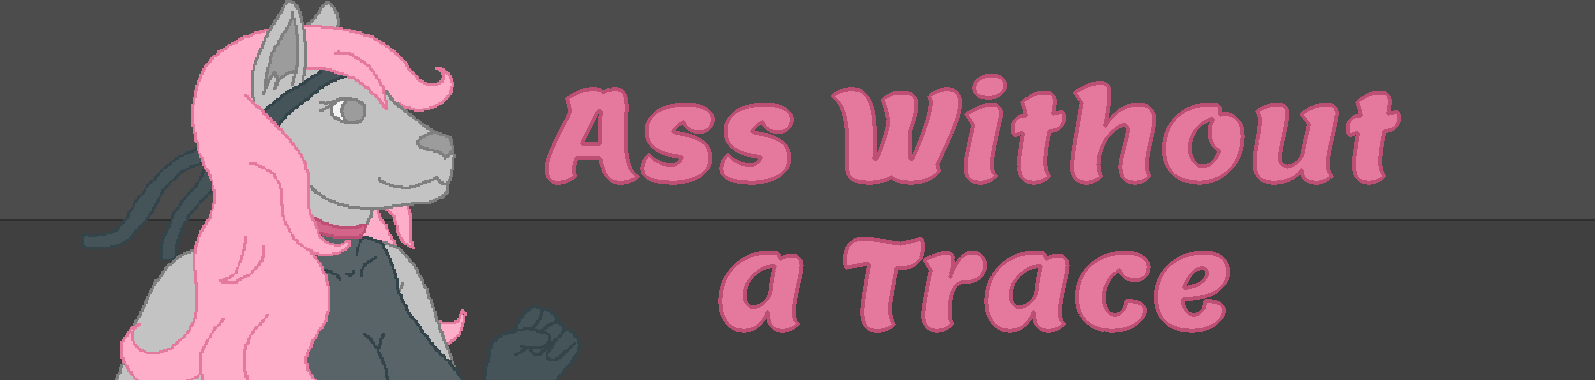 Ass Without a Trace